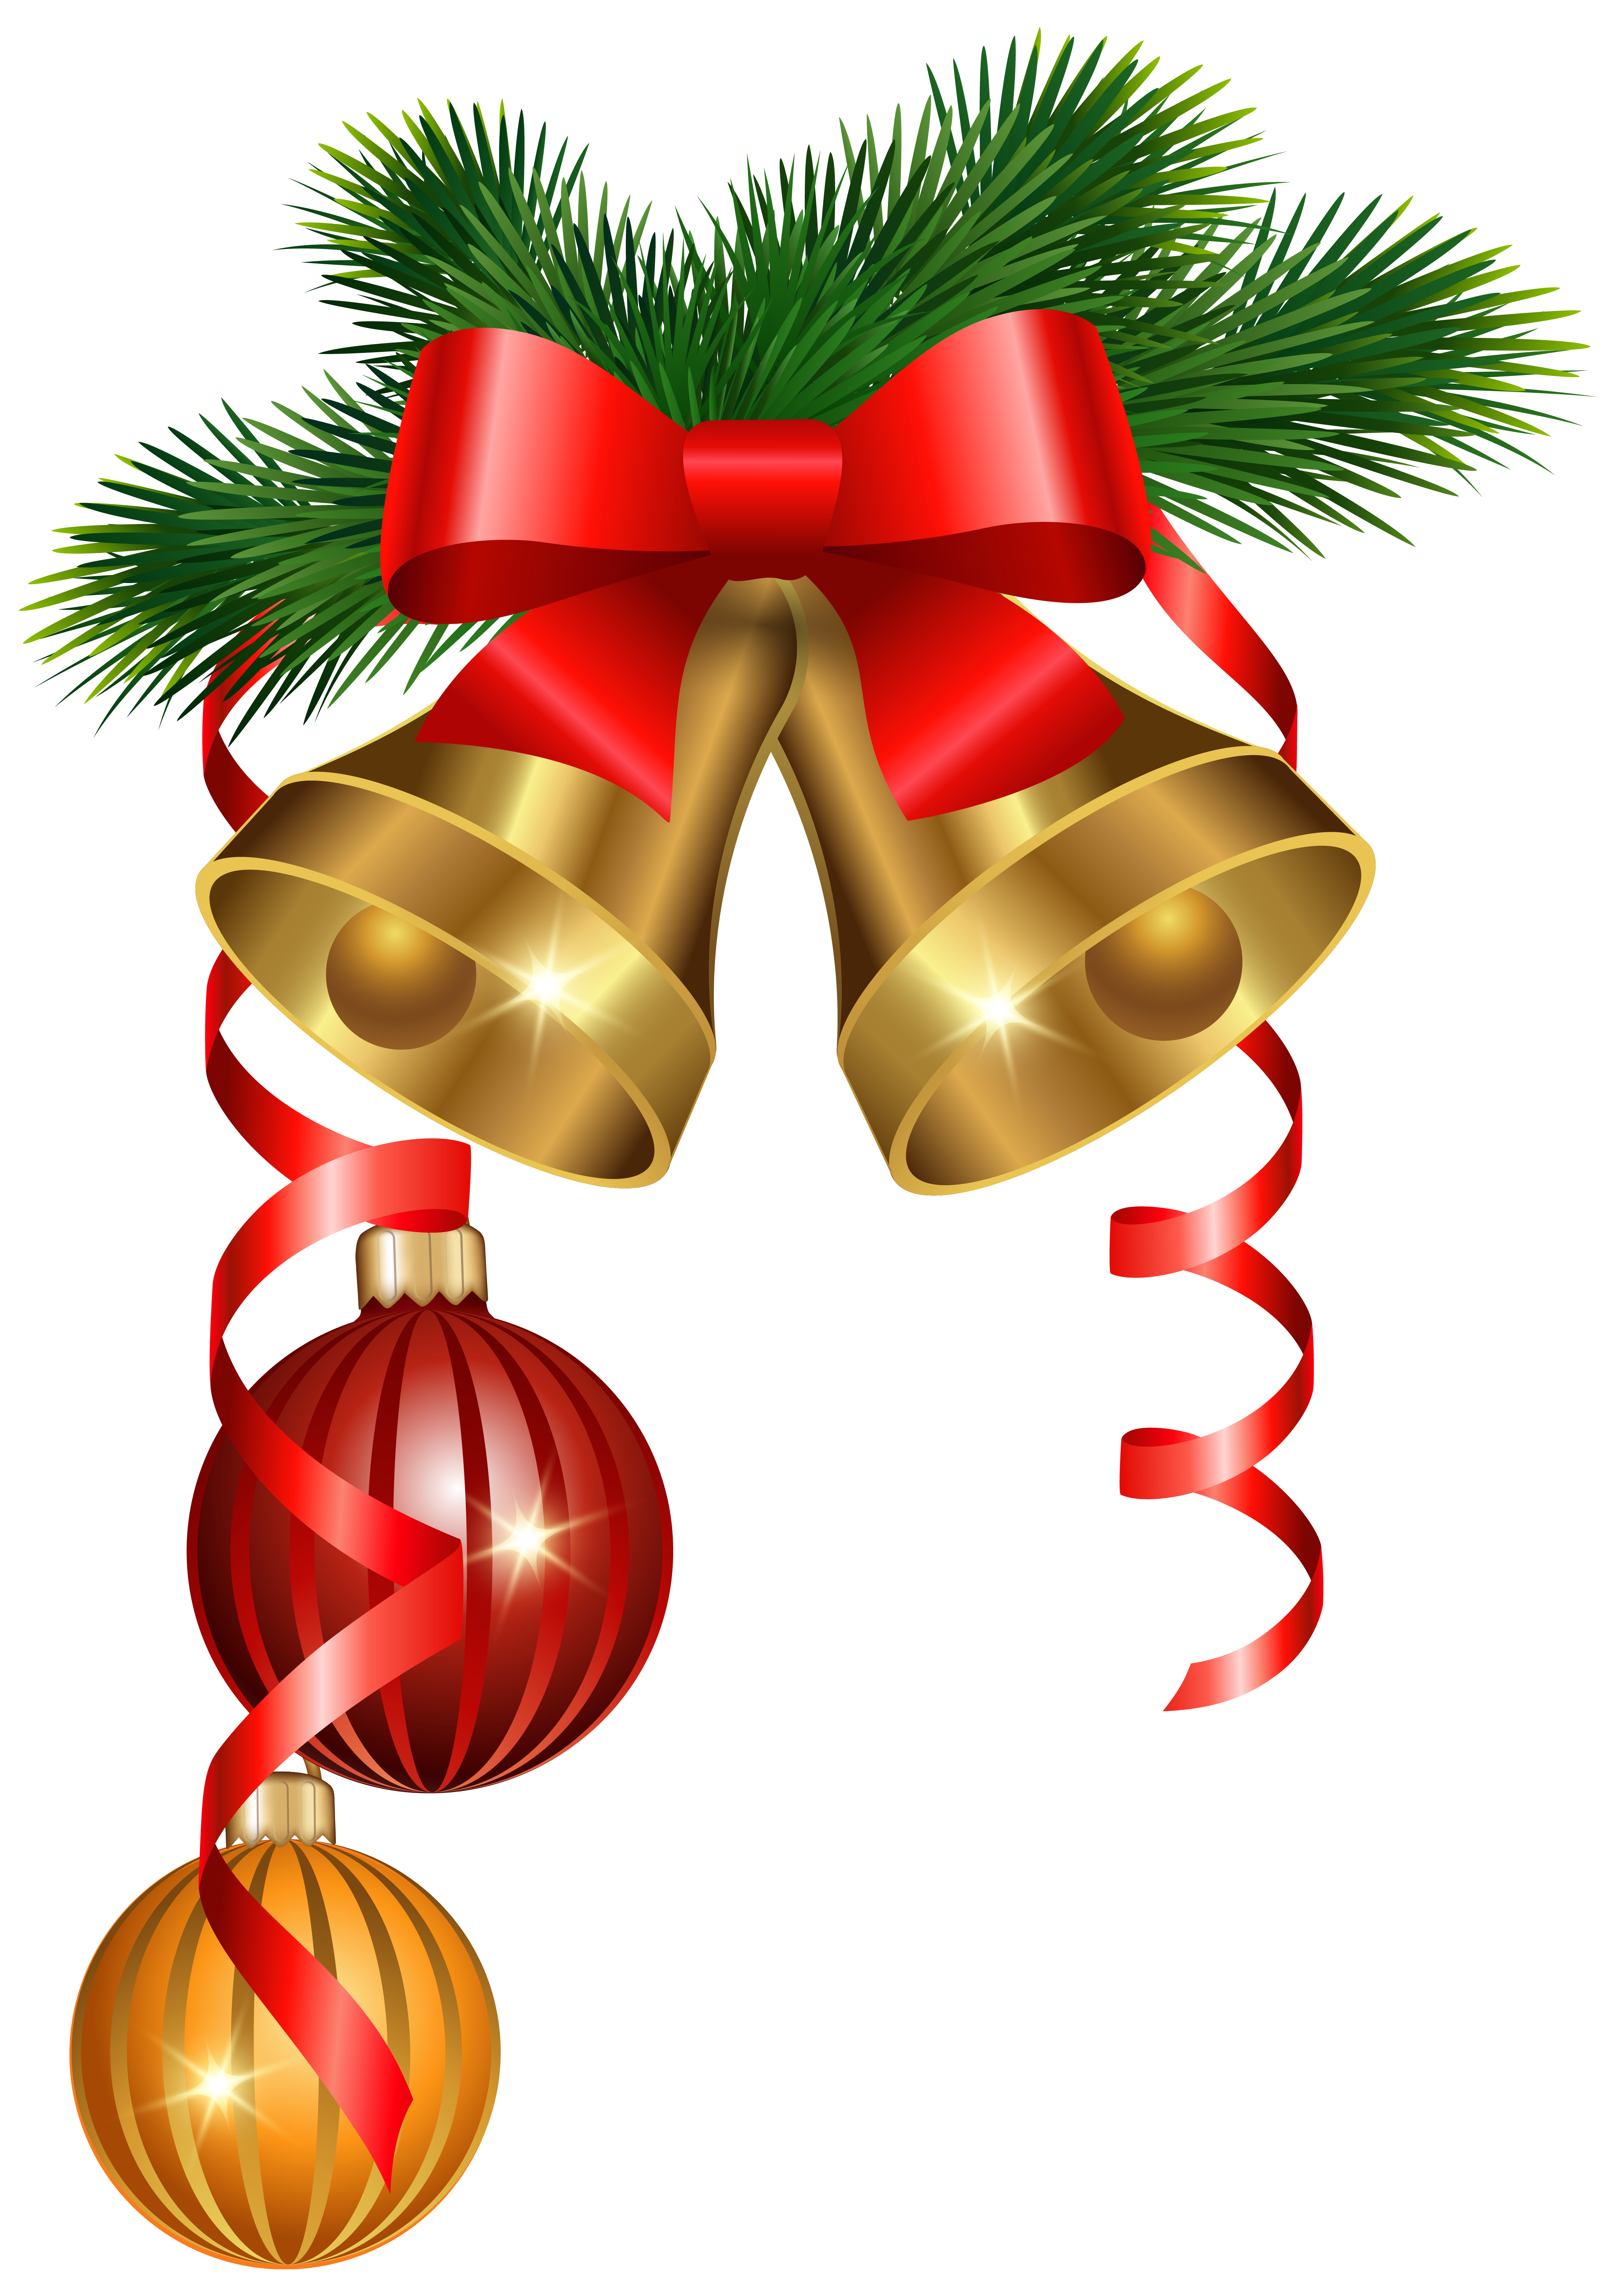 And Golden Tree Decoration Ornaments Christmas Bells Clipart